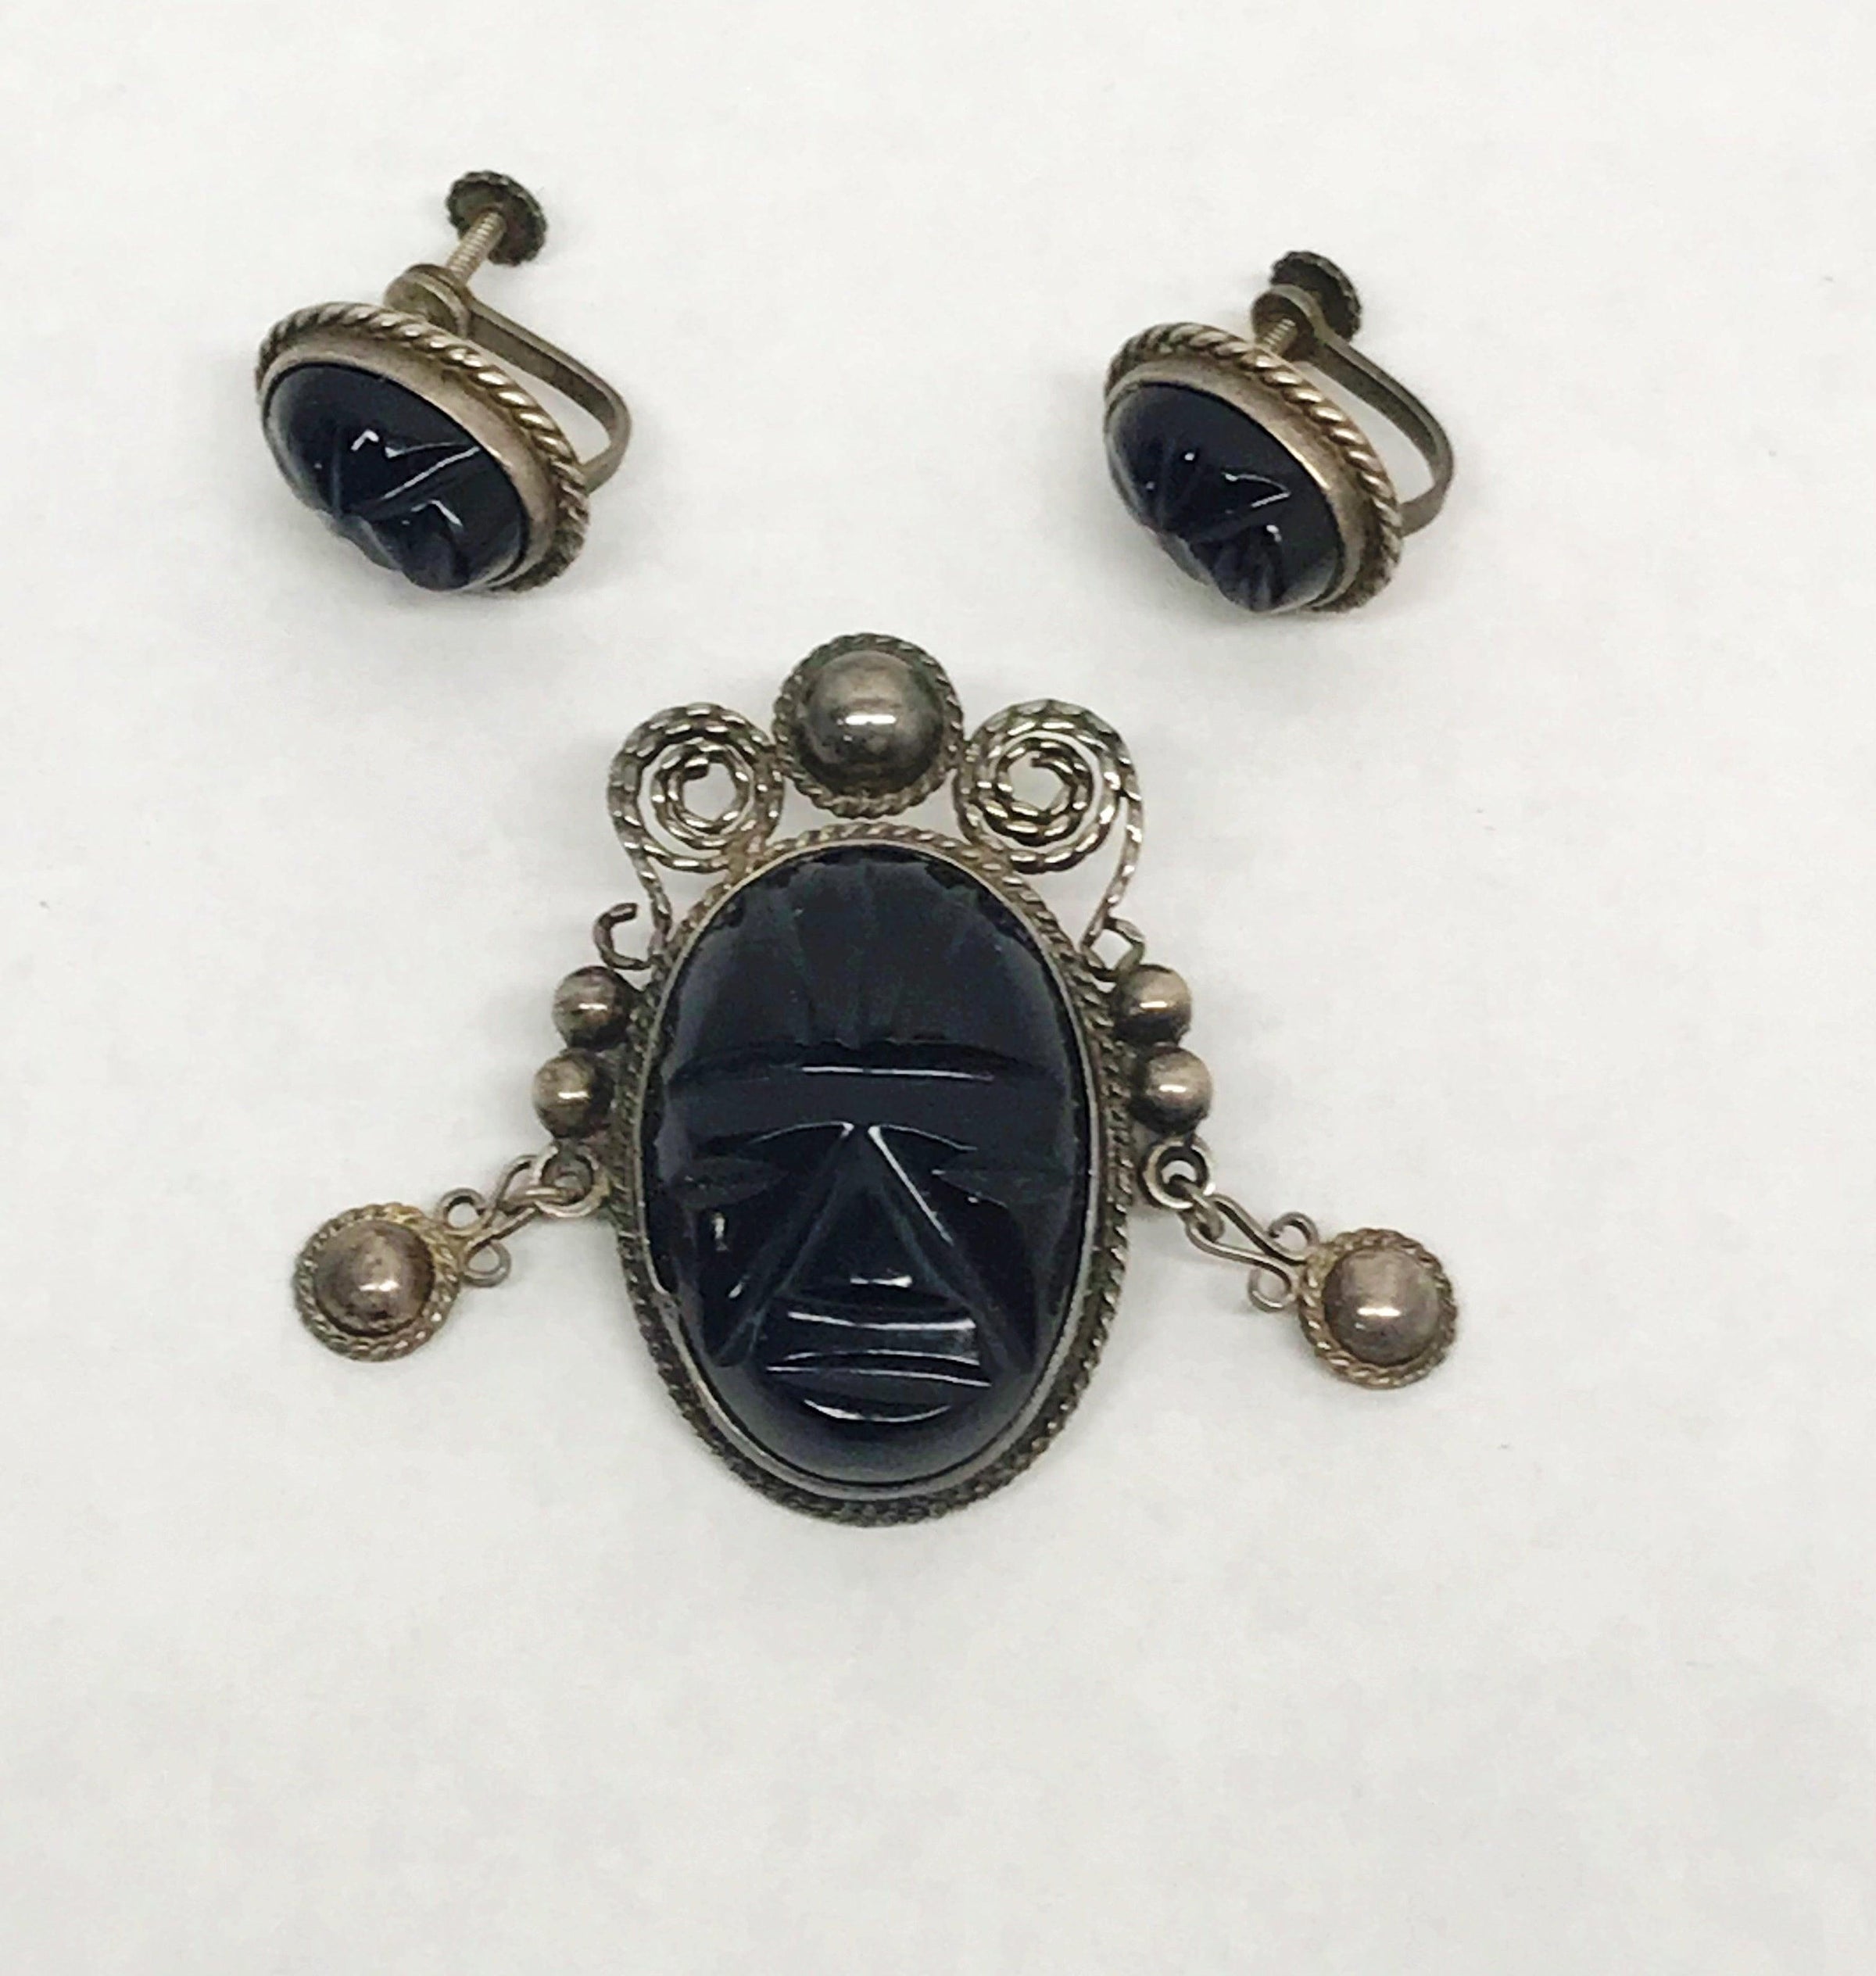 Vintage Carved Black Onyx Aztec/Mayan Mask Sterling Silver Jewelry Set - Hers and His Treasures